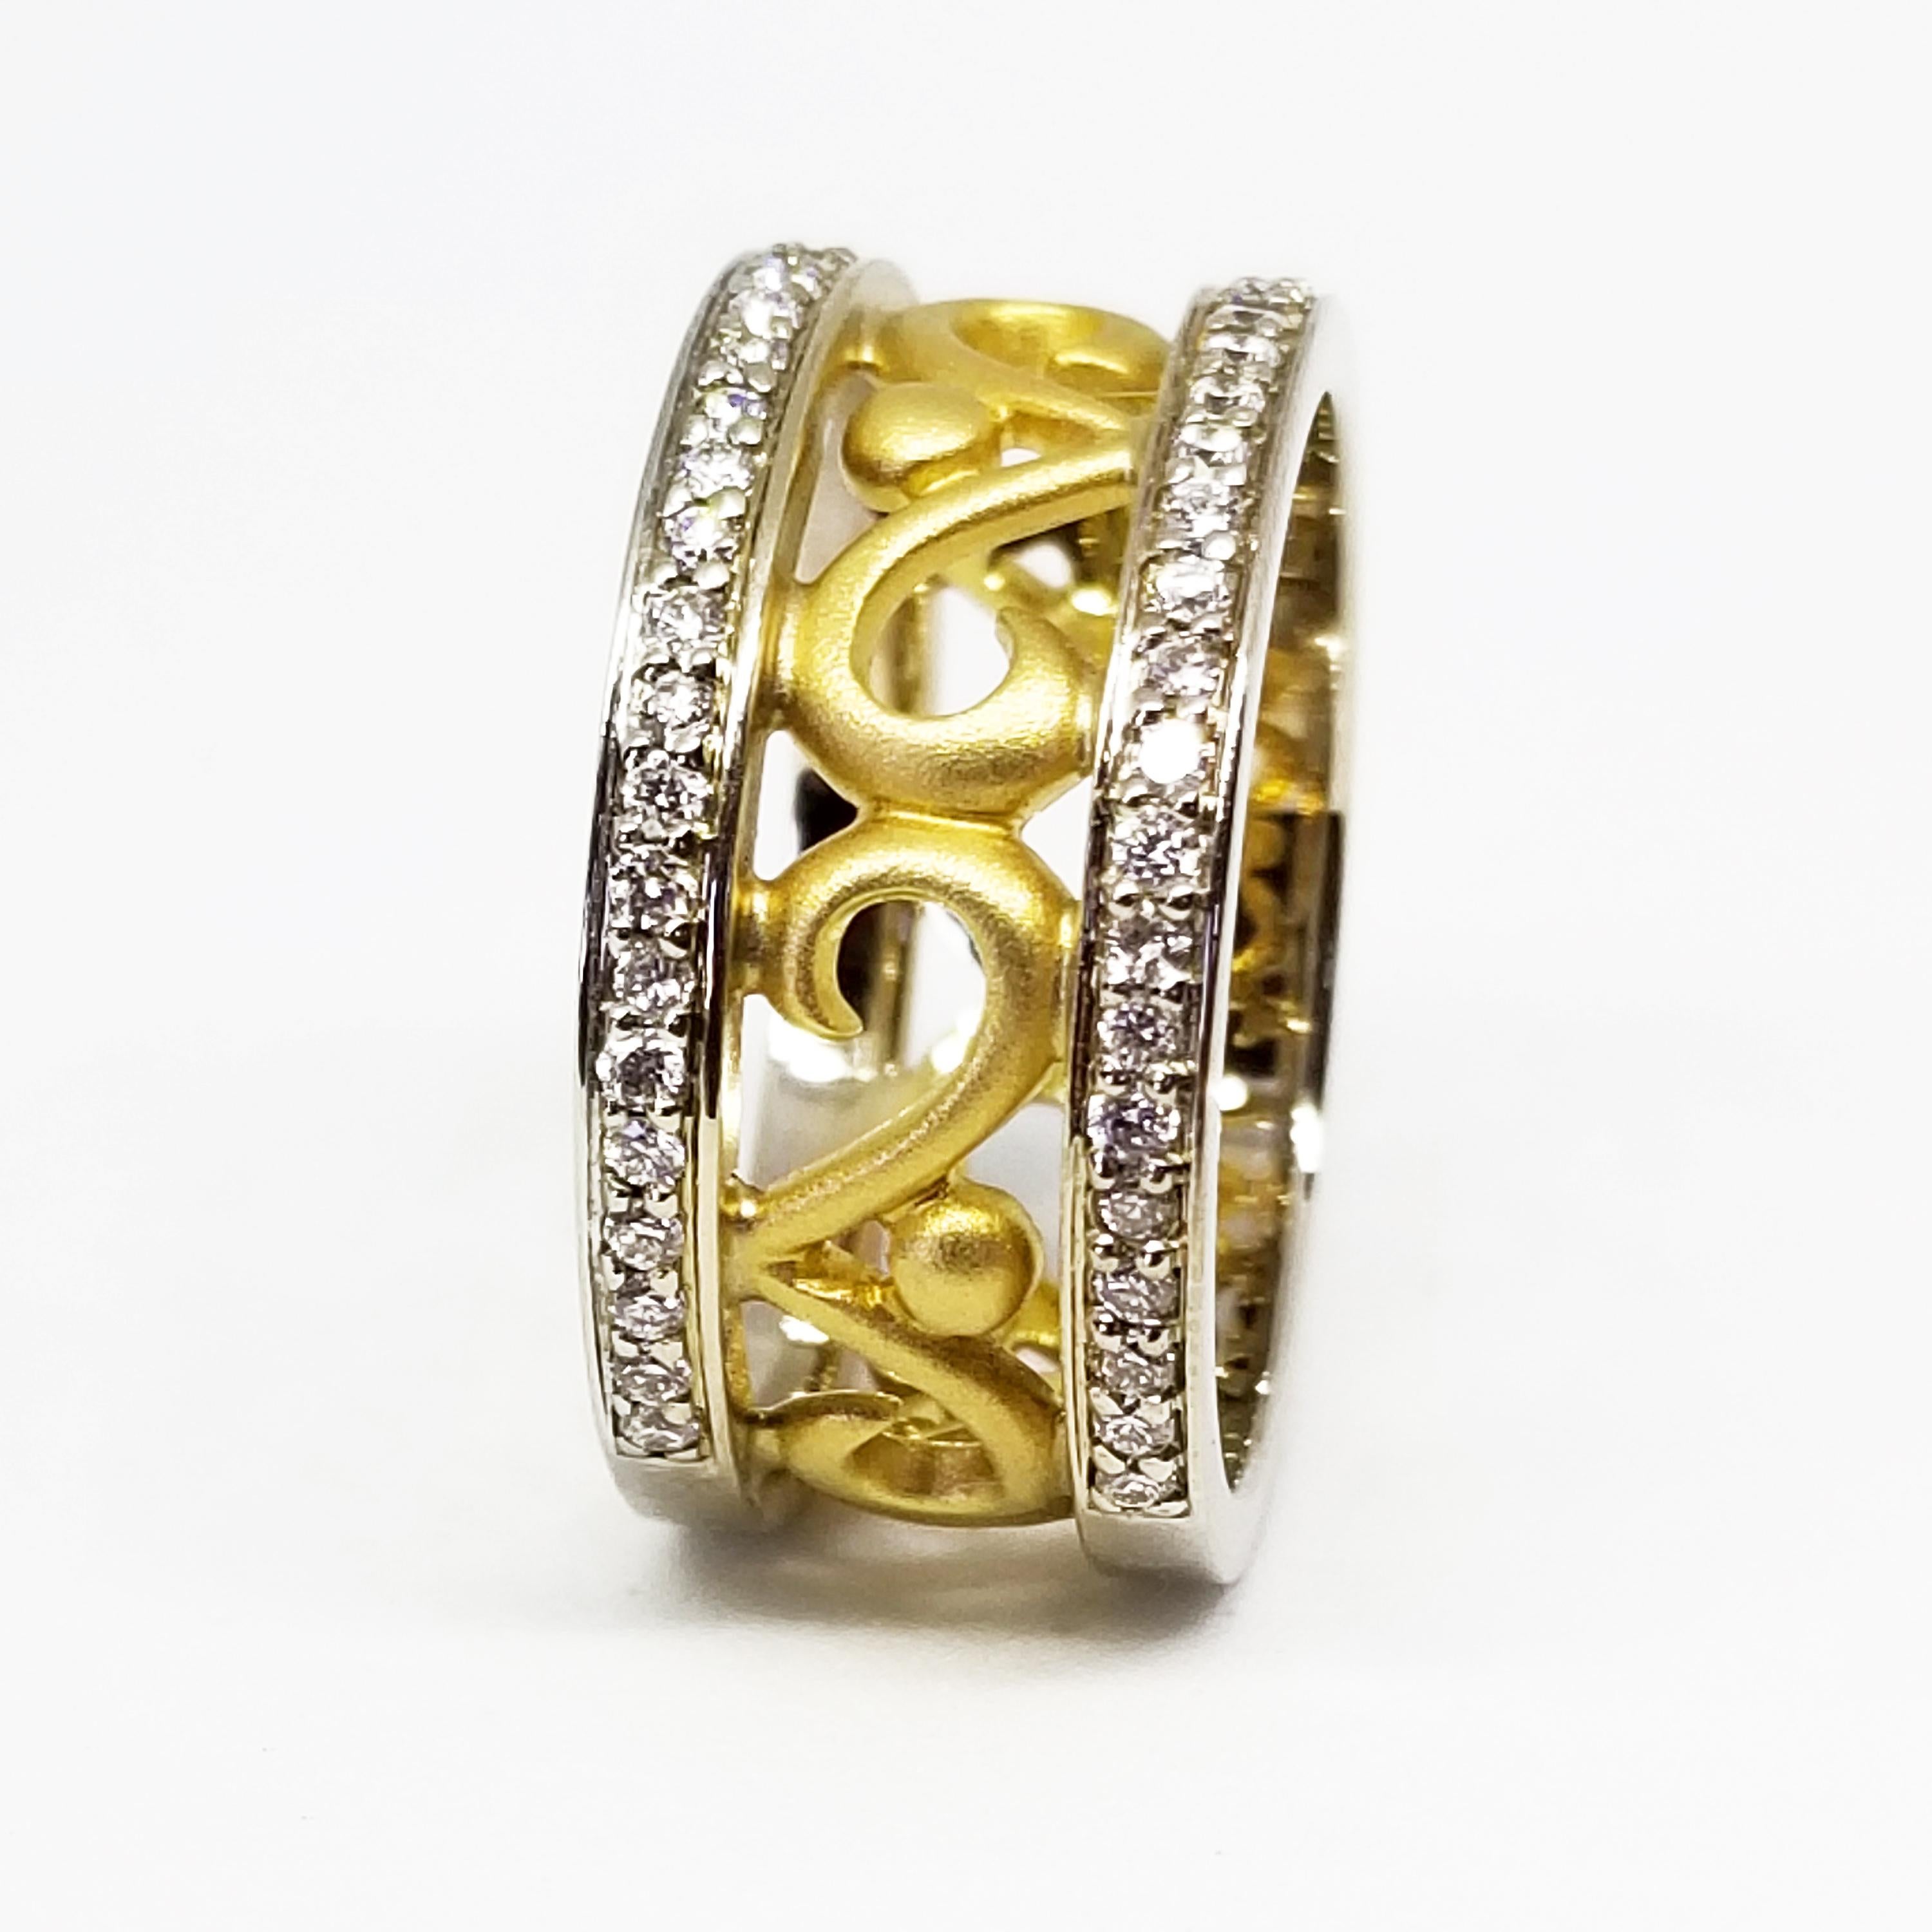 This 18 Karat Gold Eternity Ring features Round Brilliant Diamonds of 0.66 Carat total weight, G Color and Vs-Si1 Clarity, and are bead set on each outer band of the ring. The Highly Polished outer bands of the ring are 18 Karat White Gold and are